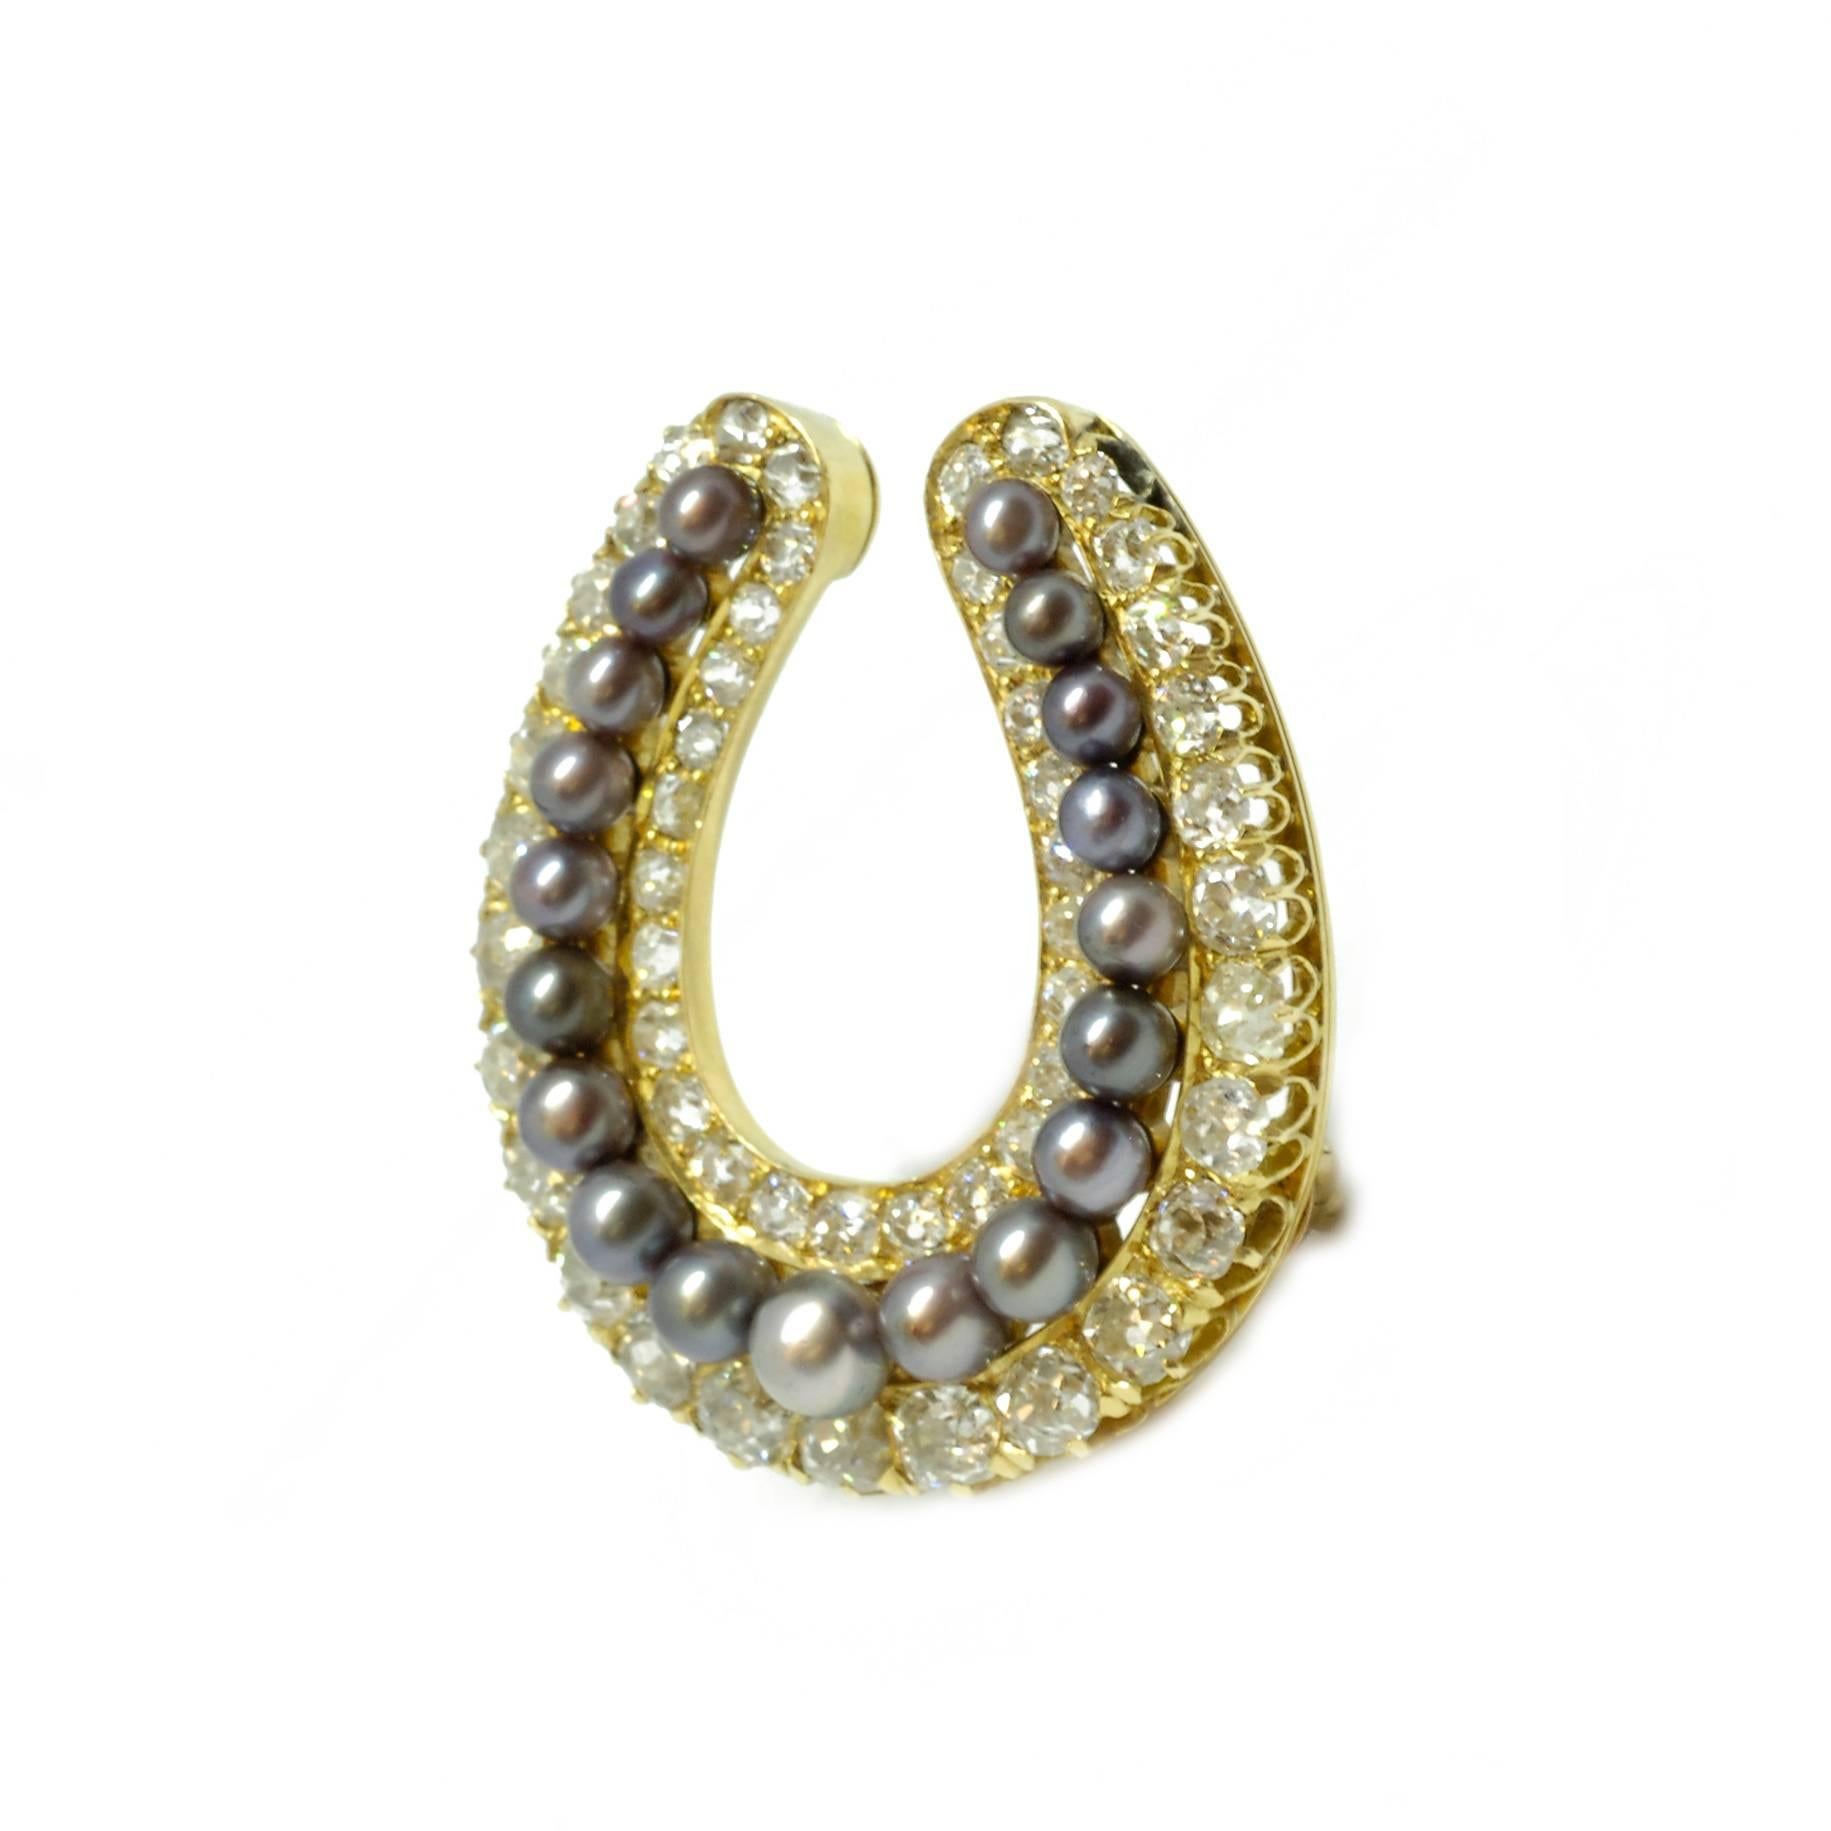 A Victorian brooch in the form of a horseshoe. Set with graduating natural Oriental black pearls, bordered by a row of old cut diamonds and mounted in 18ct yellow gold and silver. The brooch fitting is detachable and there is a fold down pendant